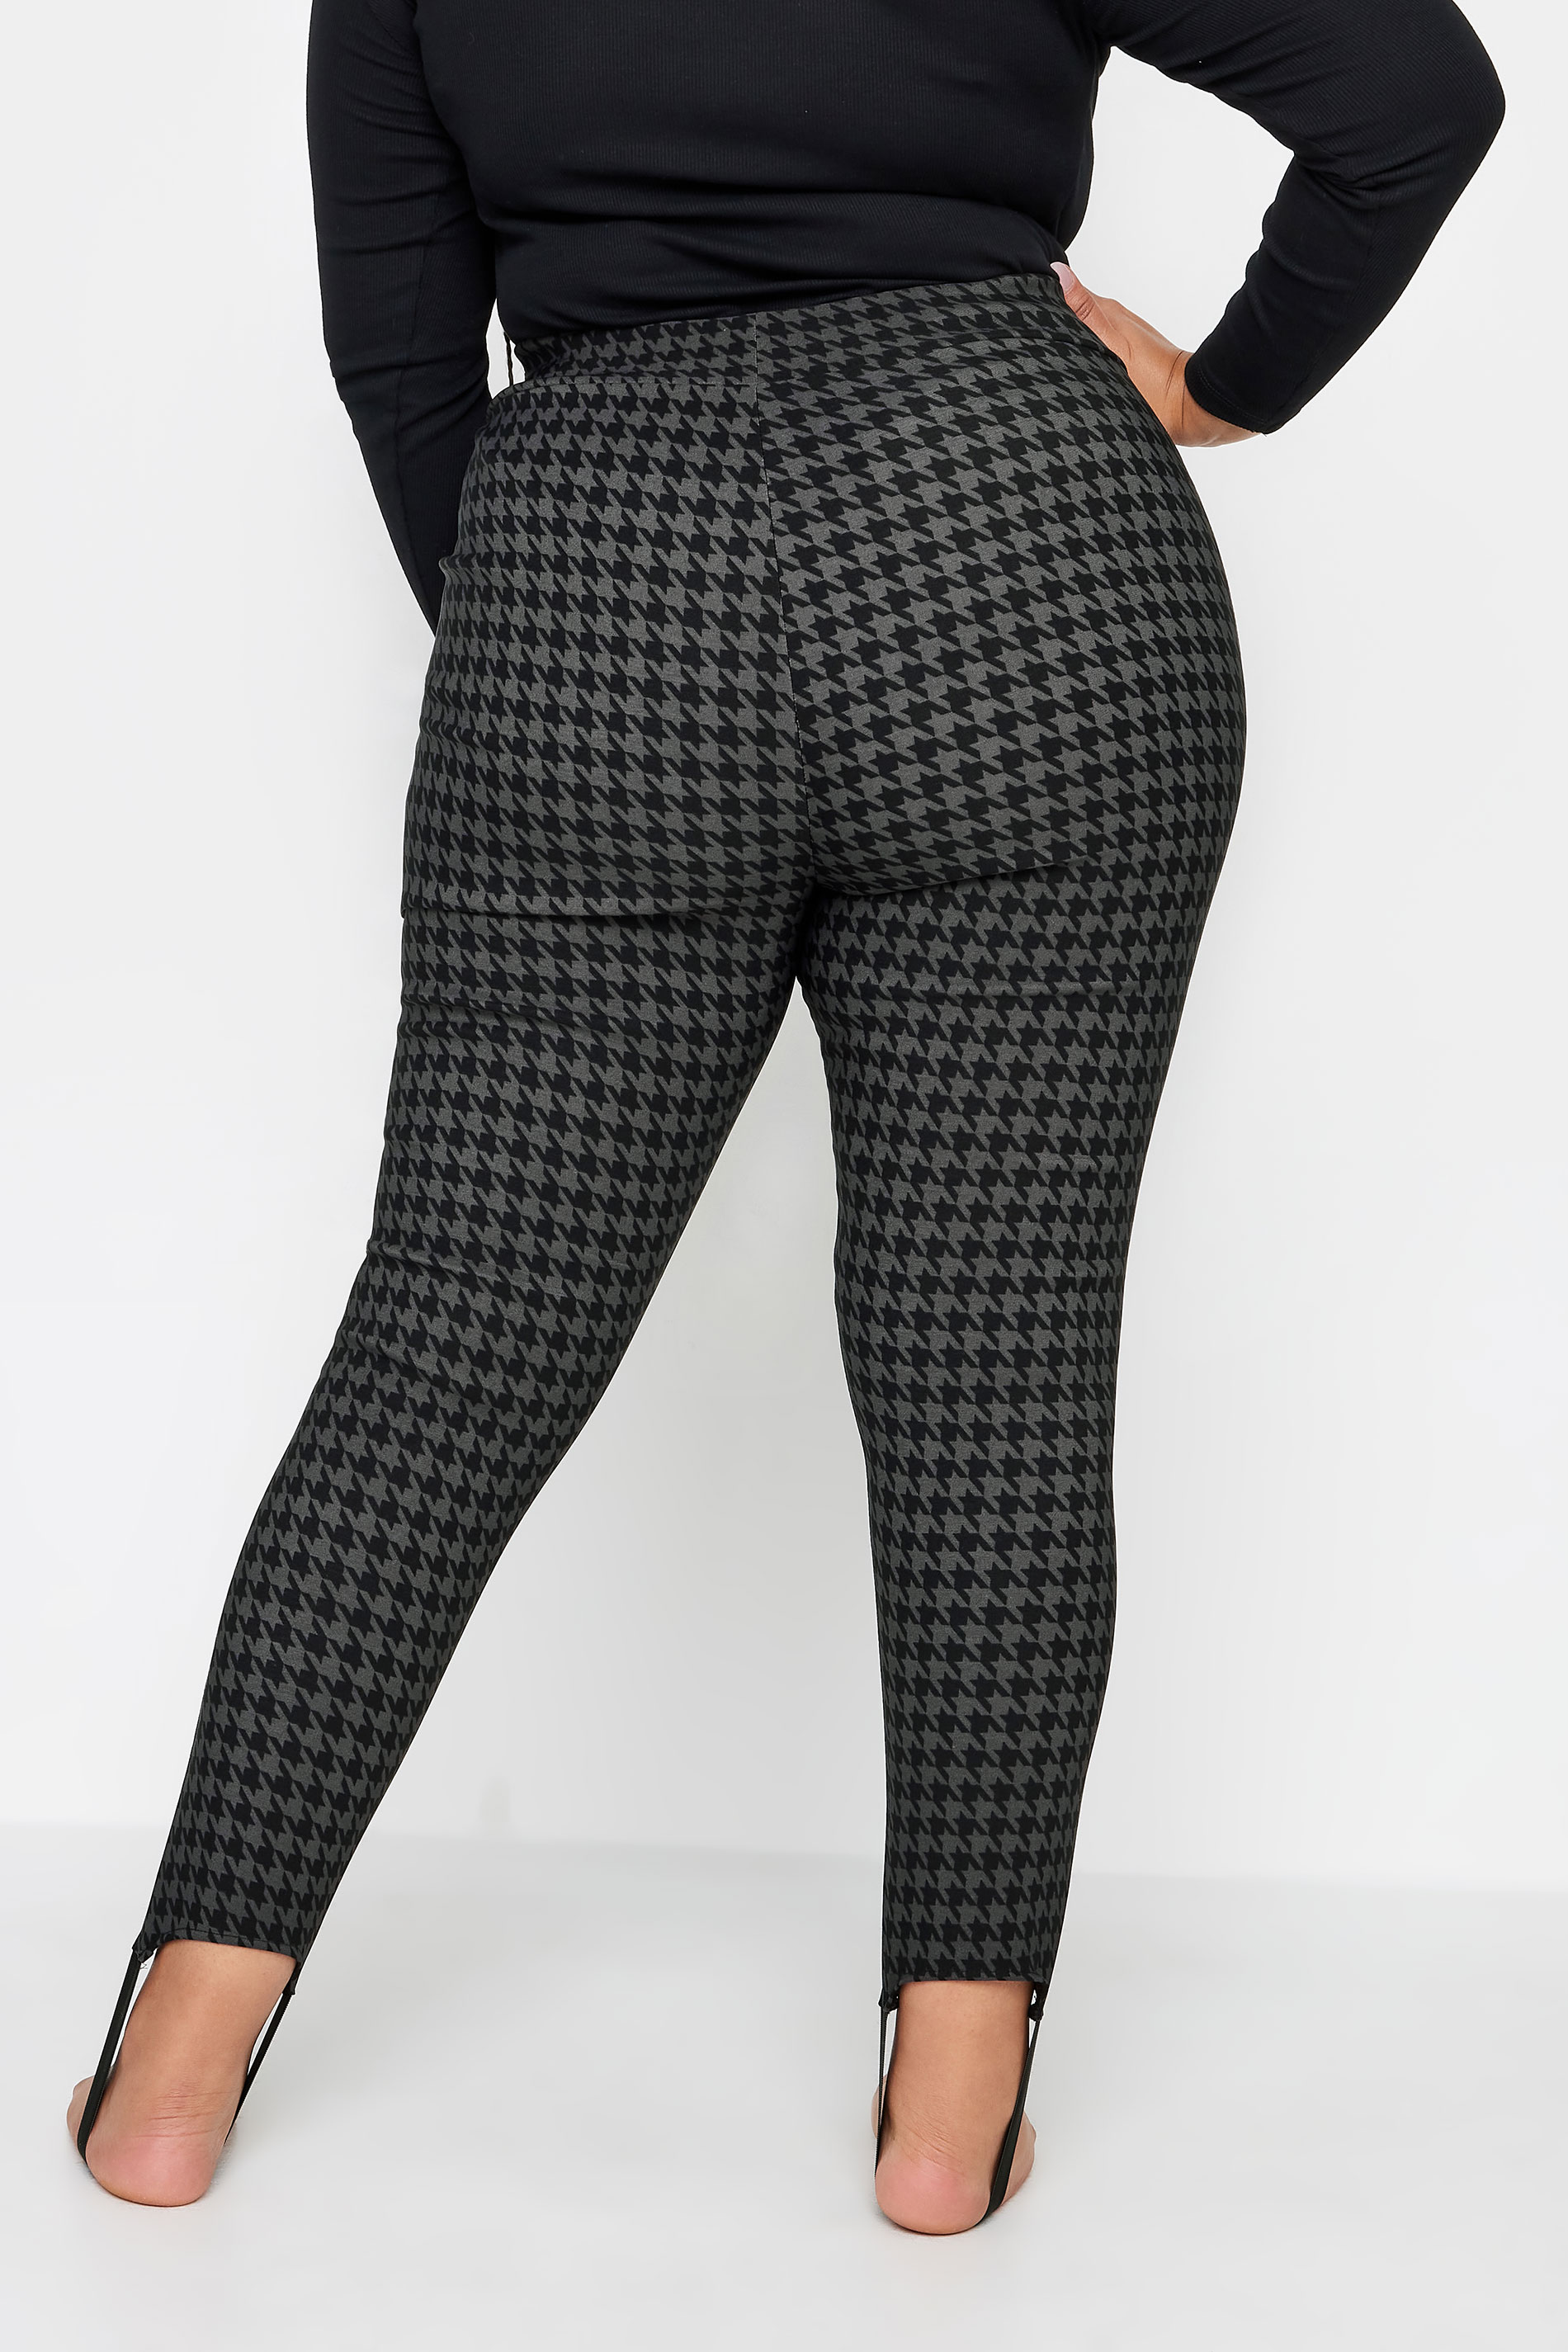 YOURS Plus Size Black Dogtooth Check Bengaline Stirrup Leggings | Yours Clothing 3